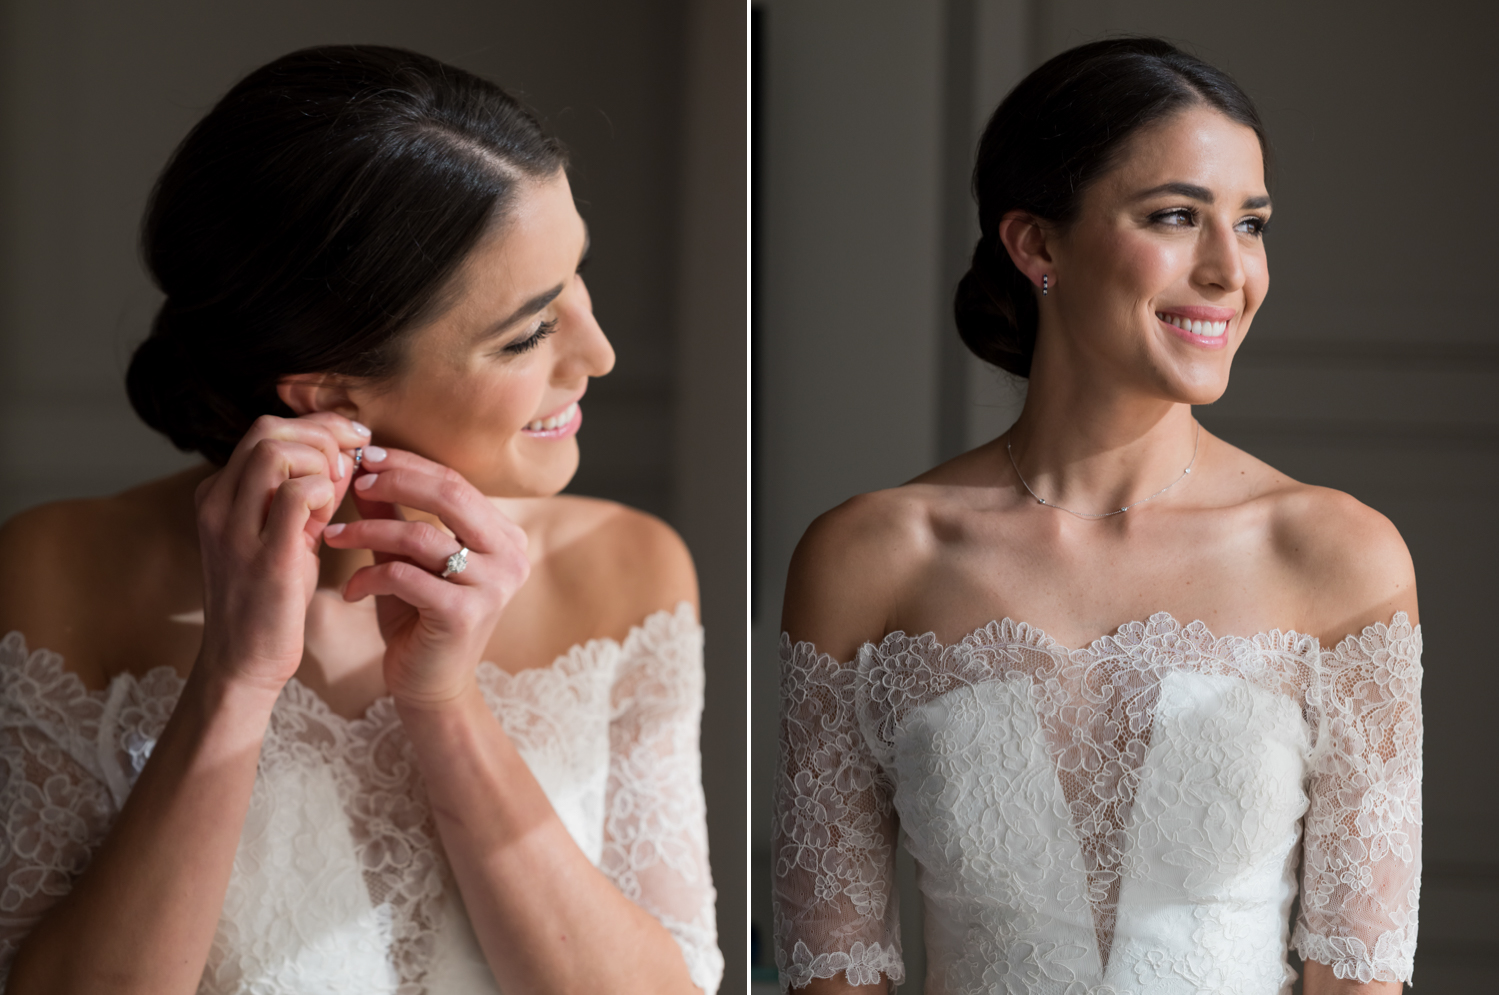 The bride looks out the window and smiles after putting on her dress and jewelry. 